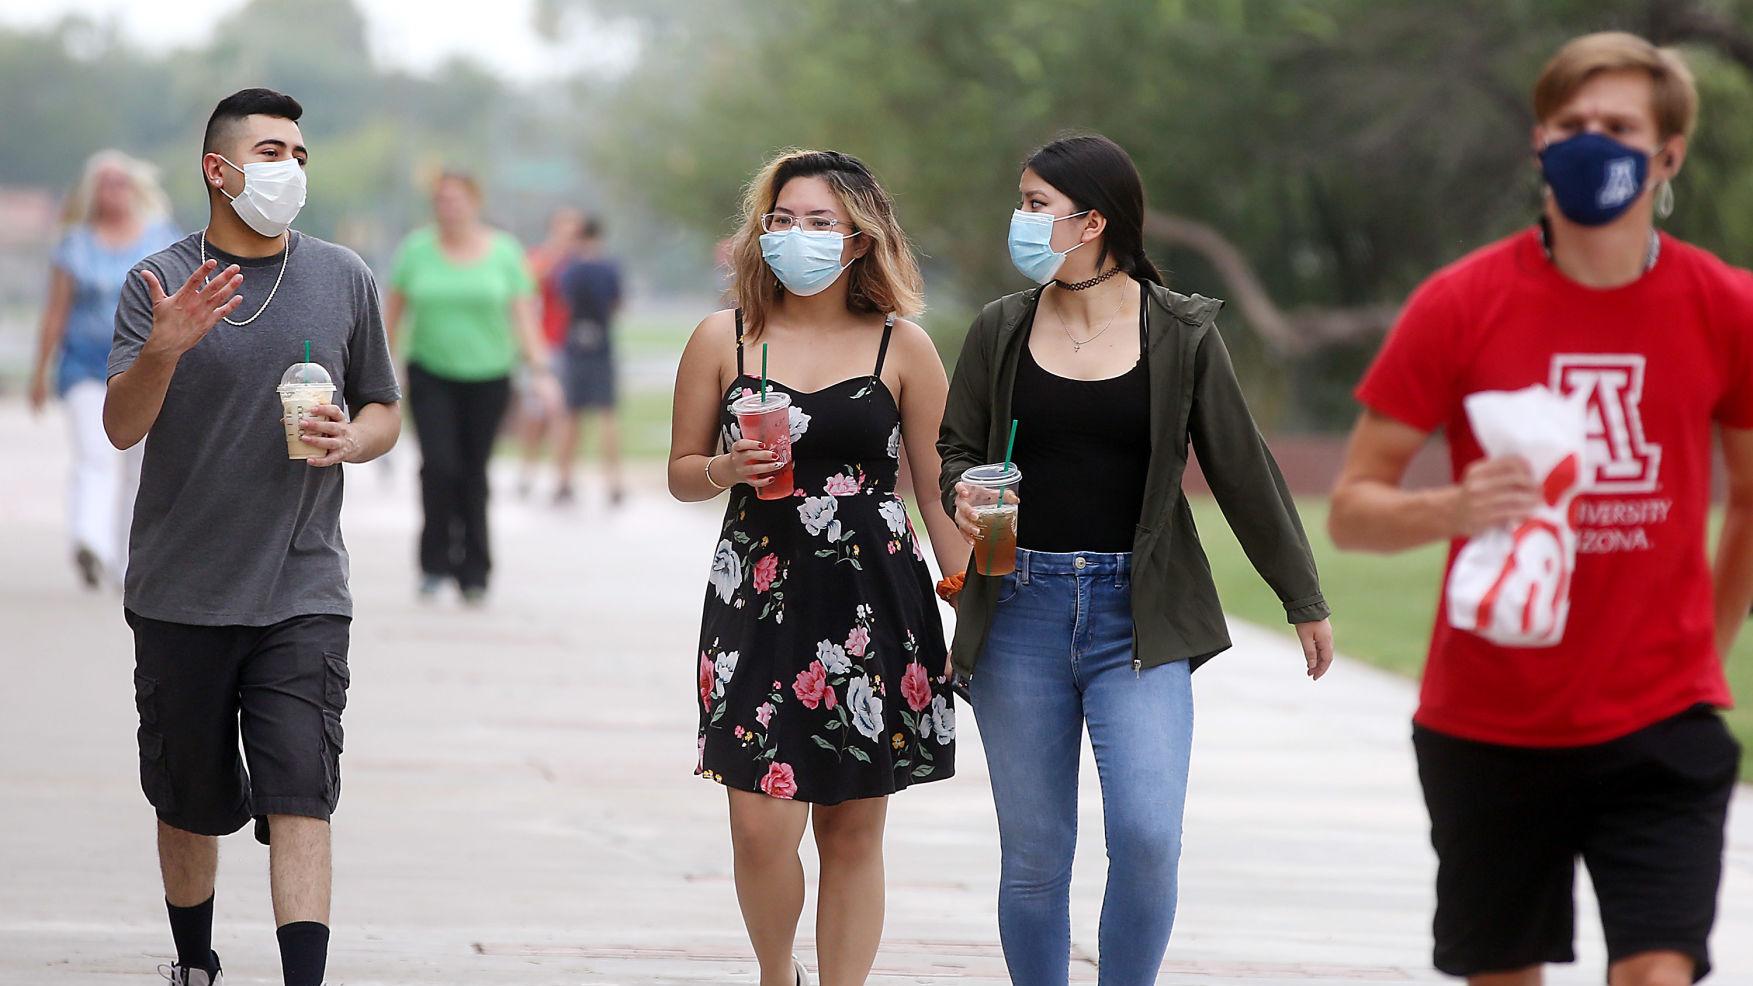 University of Arizona steps up effort to keep students from violating  health, safety rules | Local news | tucson.com